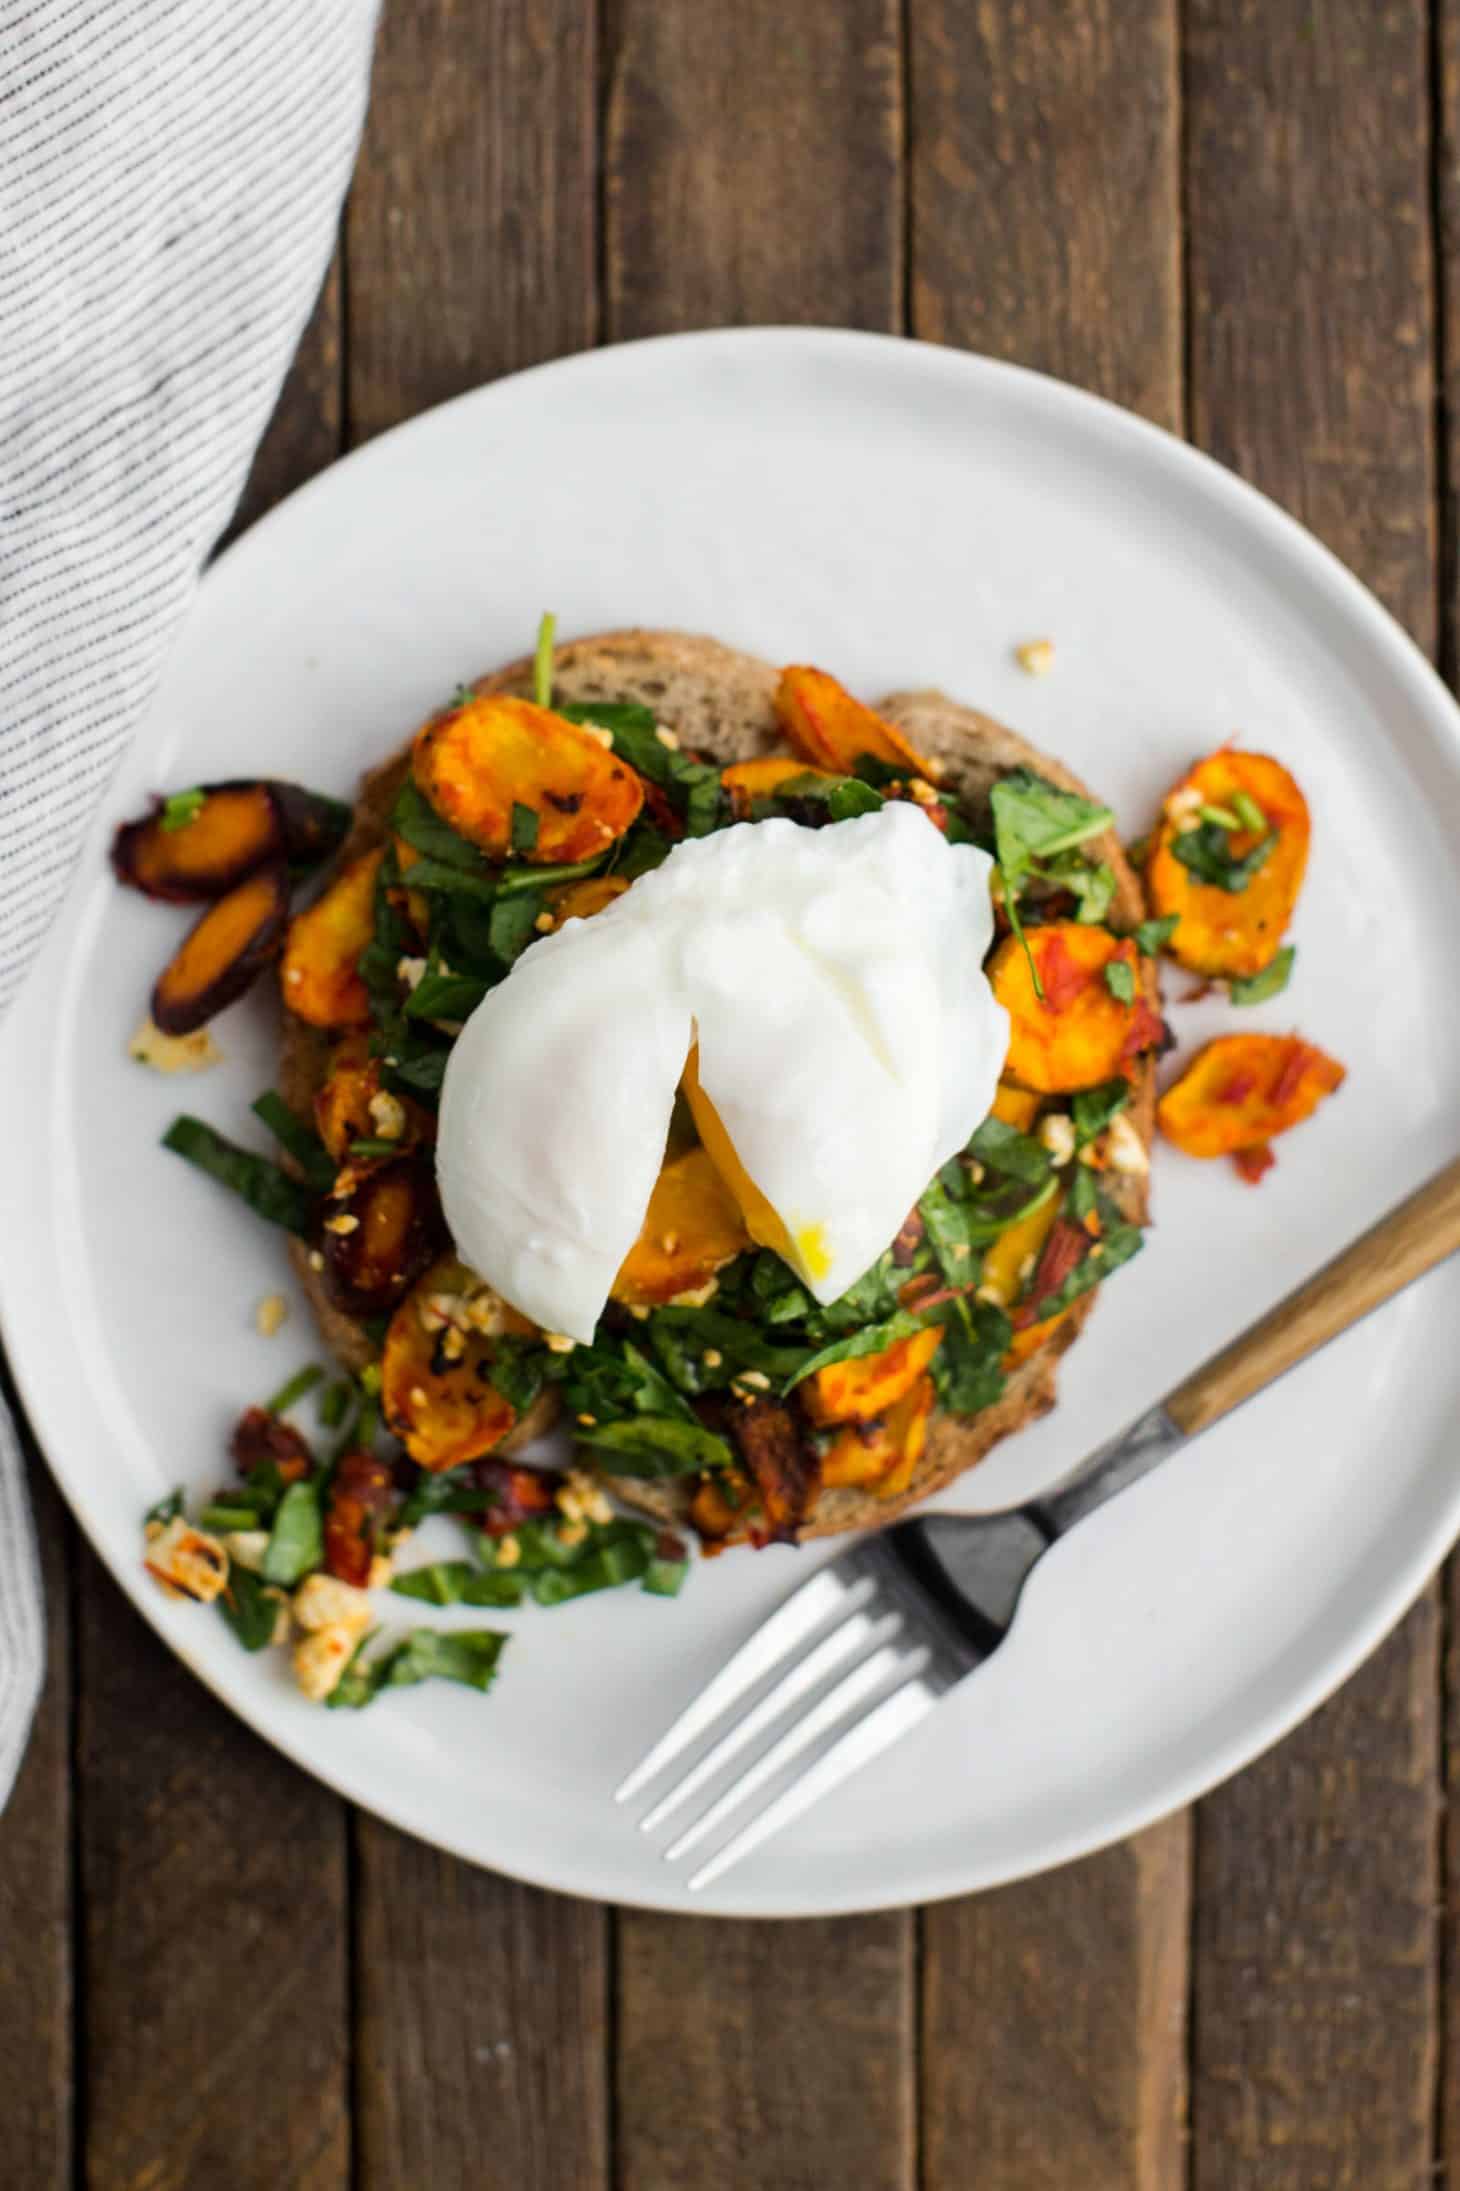 Harissa Roasted Carrot Toast with Poached Egg